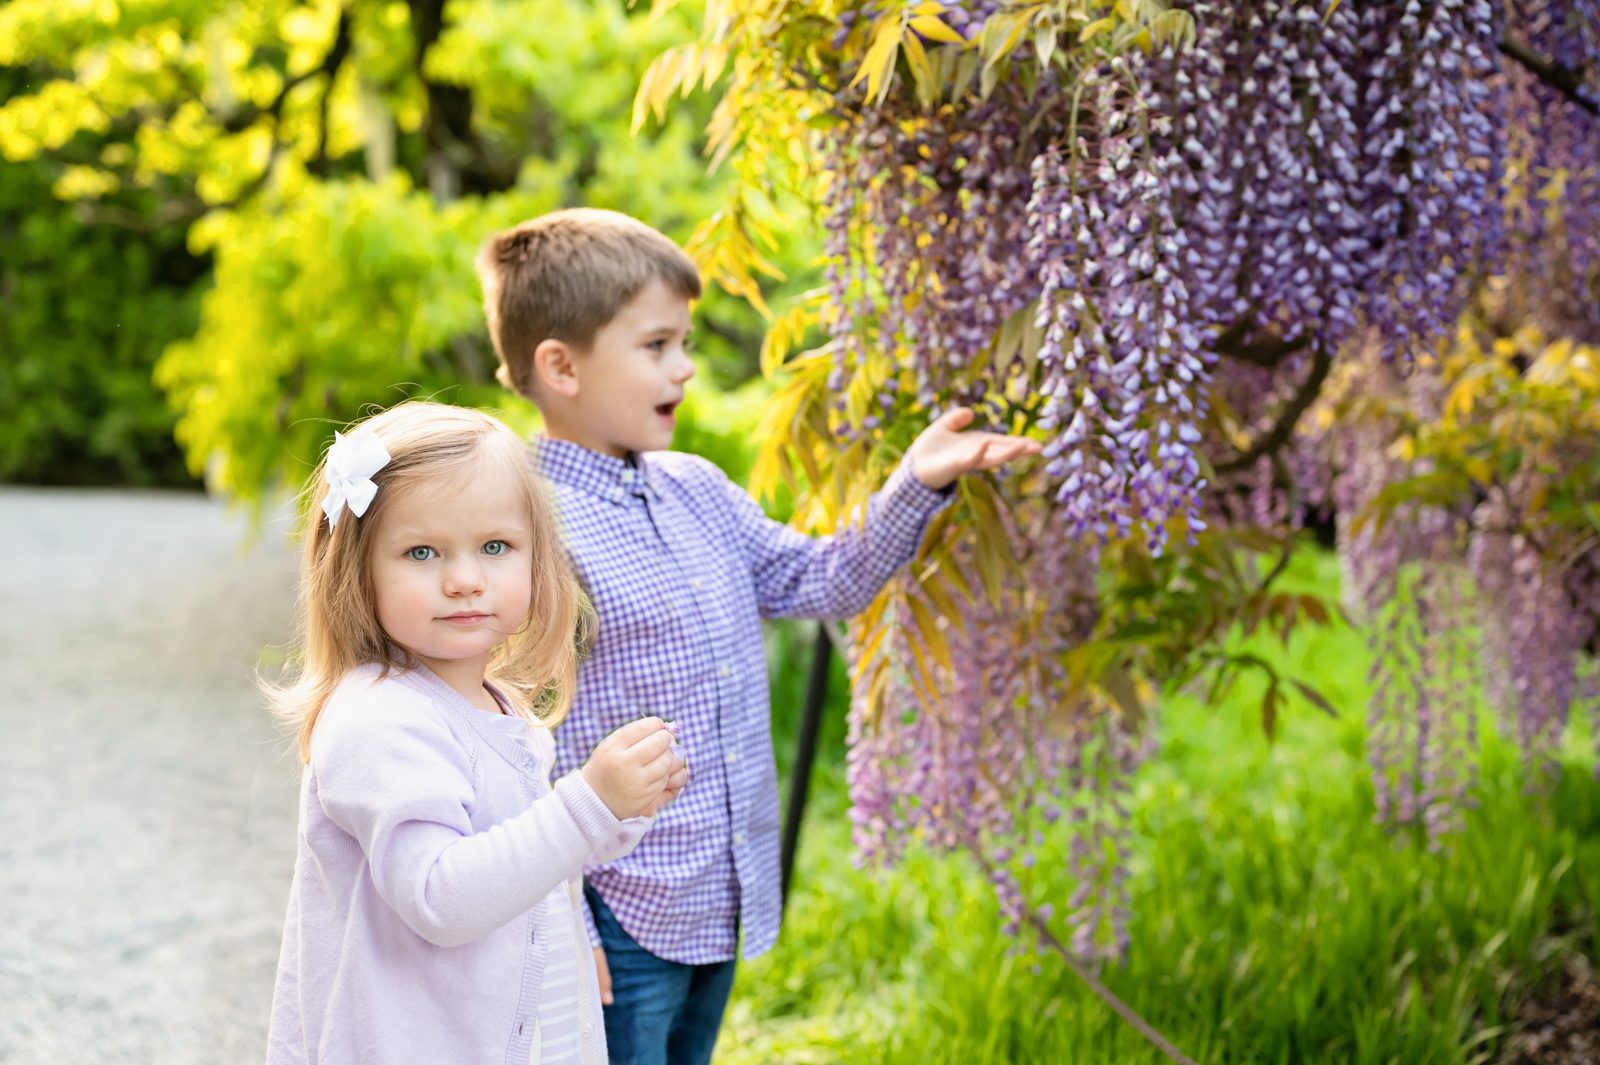 a young girl looking directly into the camera while her brother reaches out to touch a purple wisteria flower in the background during a spring photos session